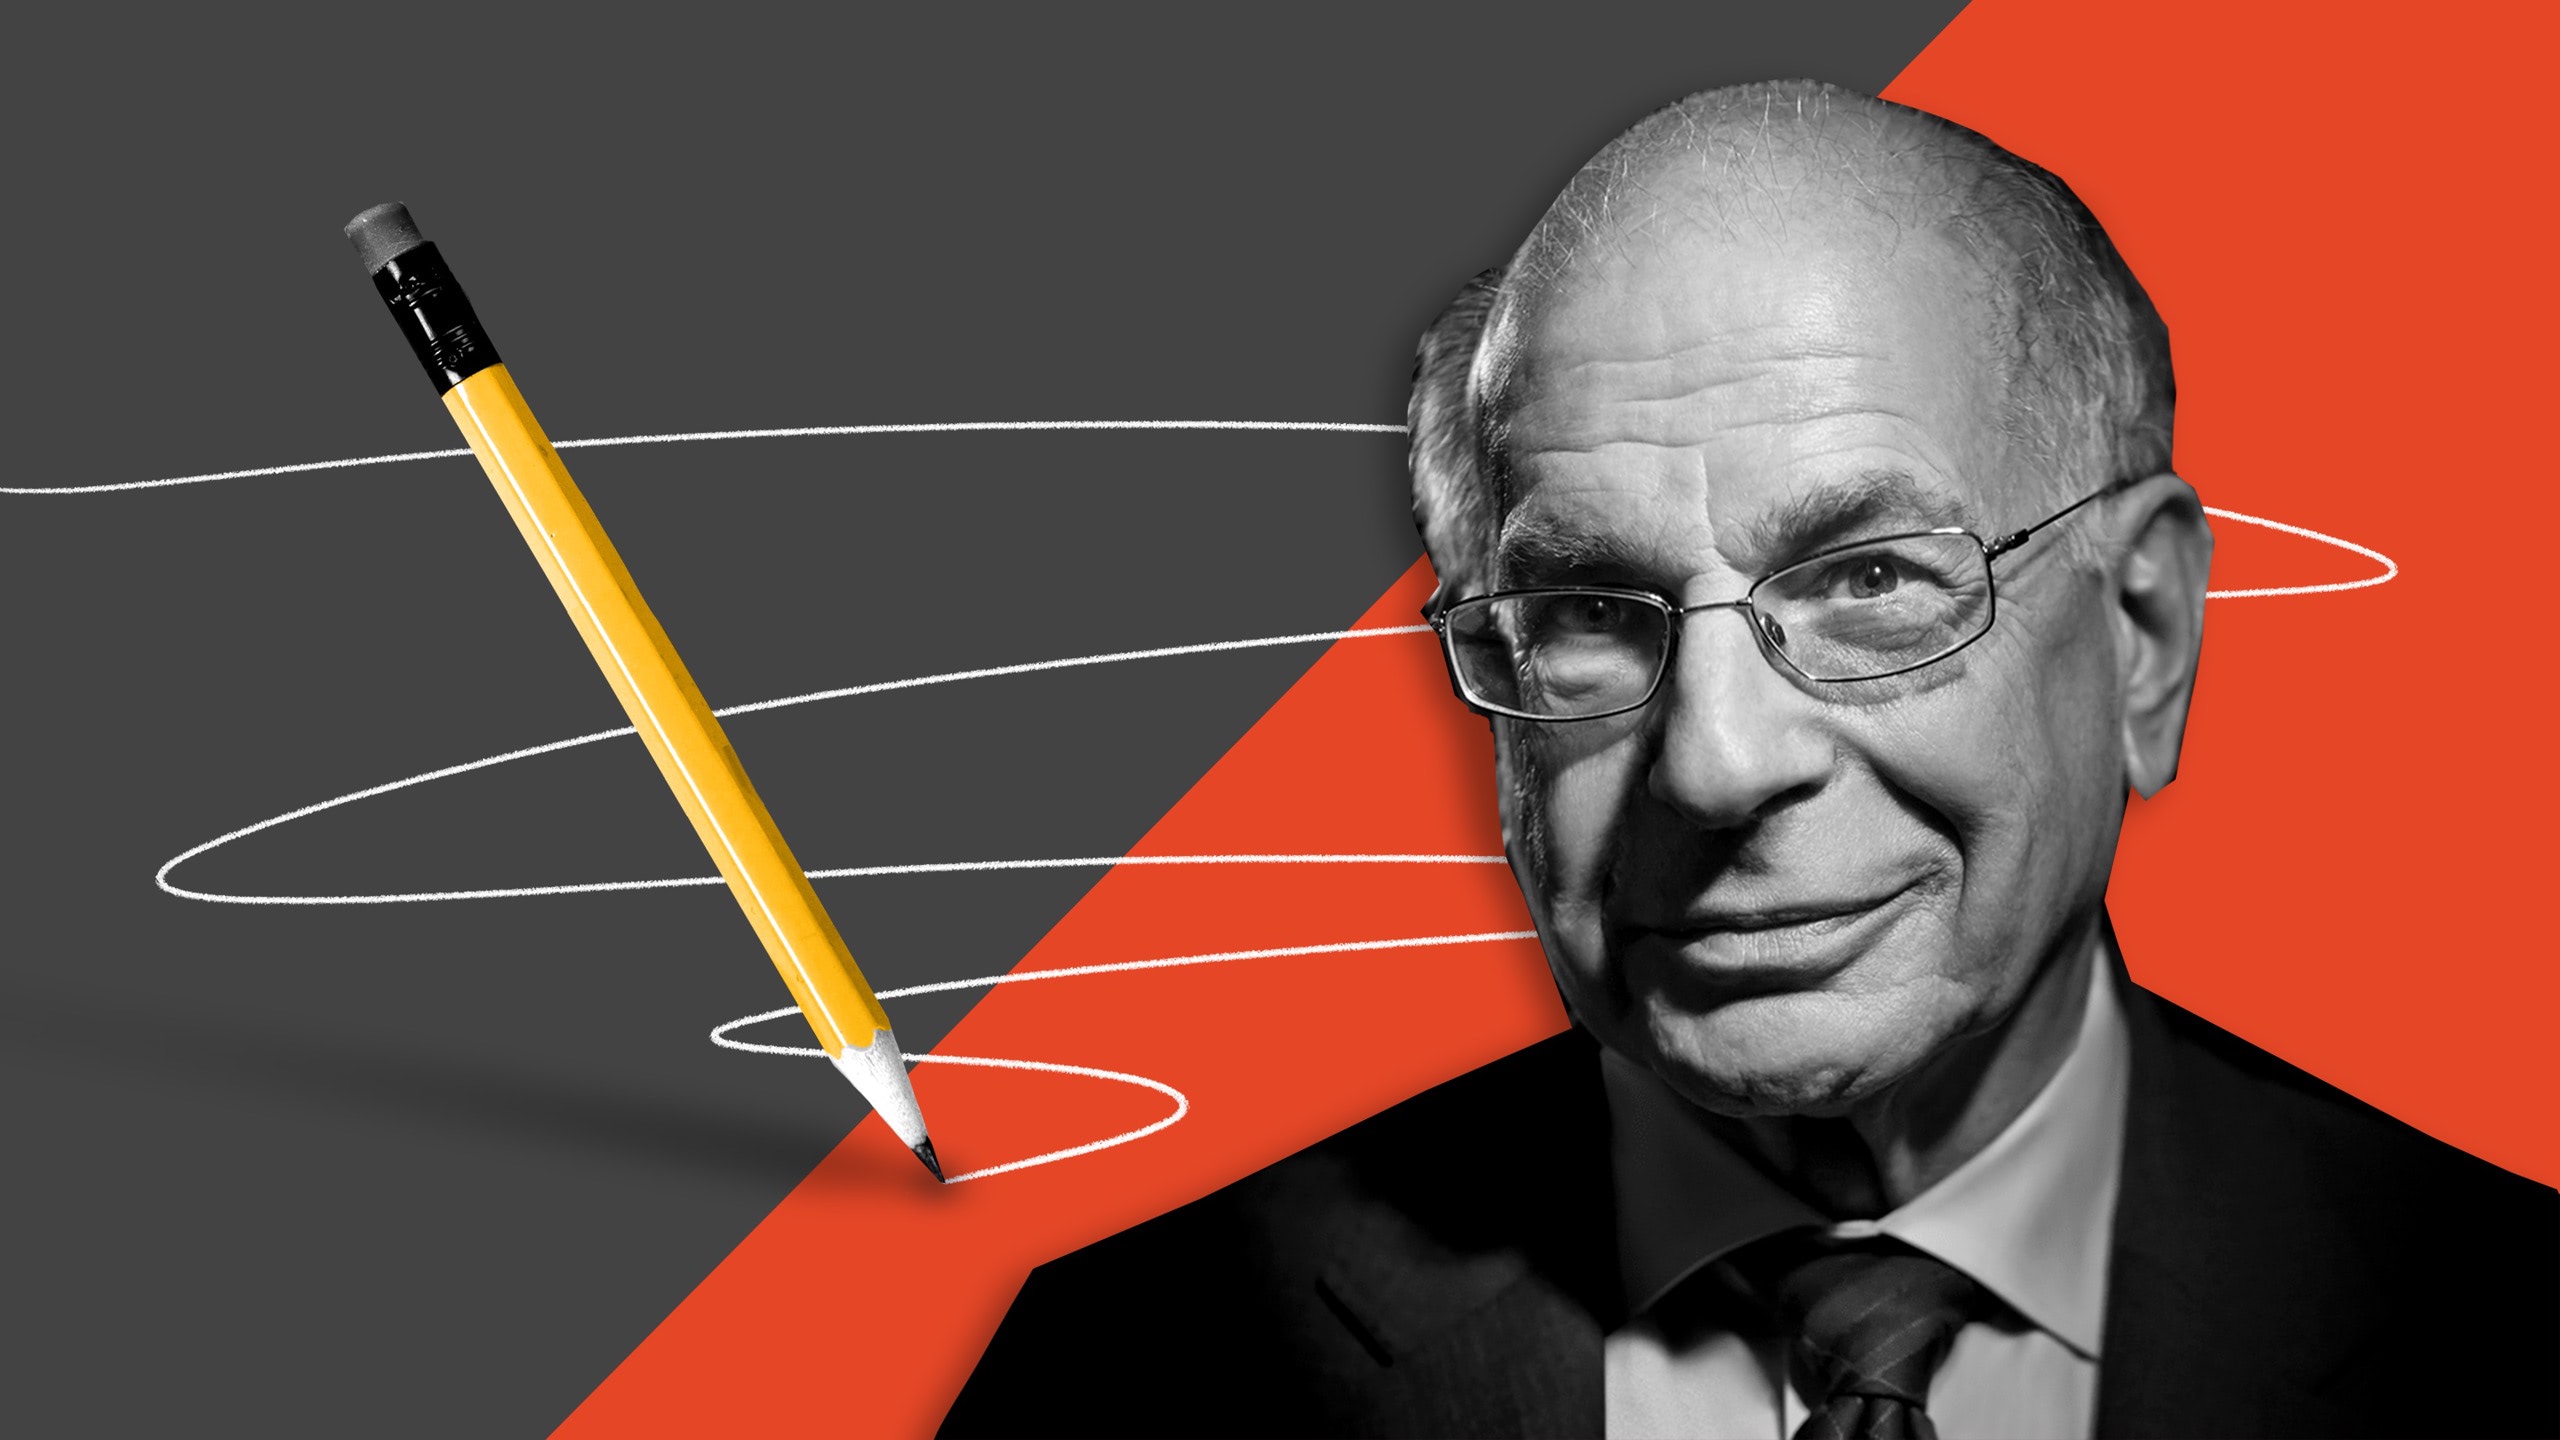 The Great Debate: Daniel Kahneman on the Value of Market Research in Business Decision-Making